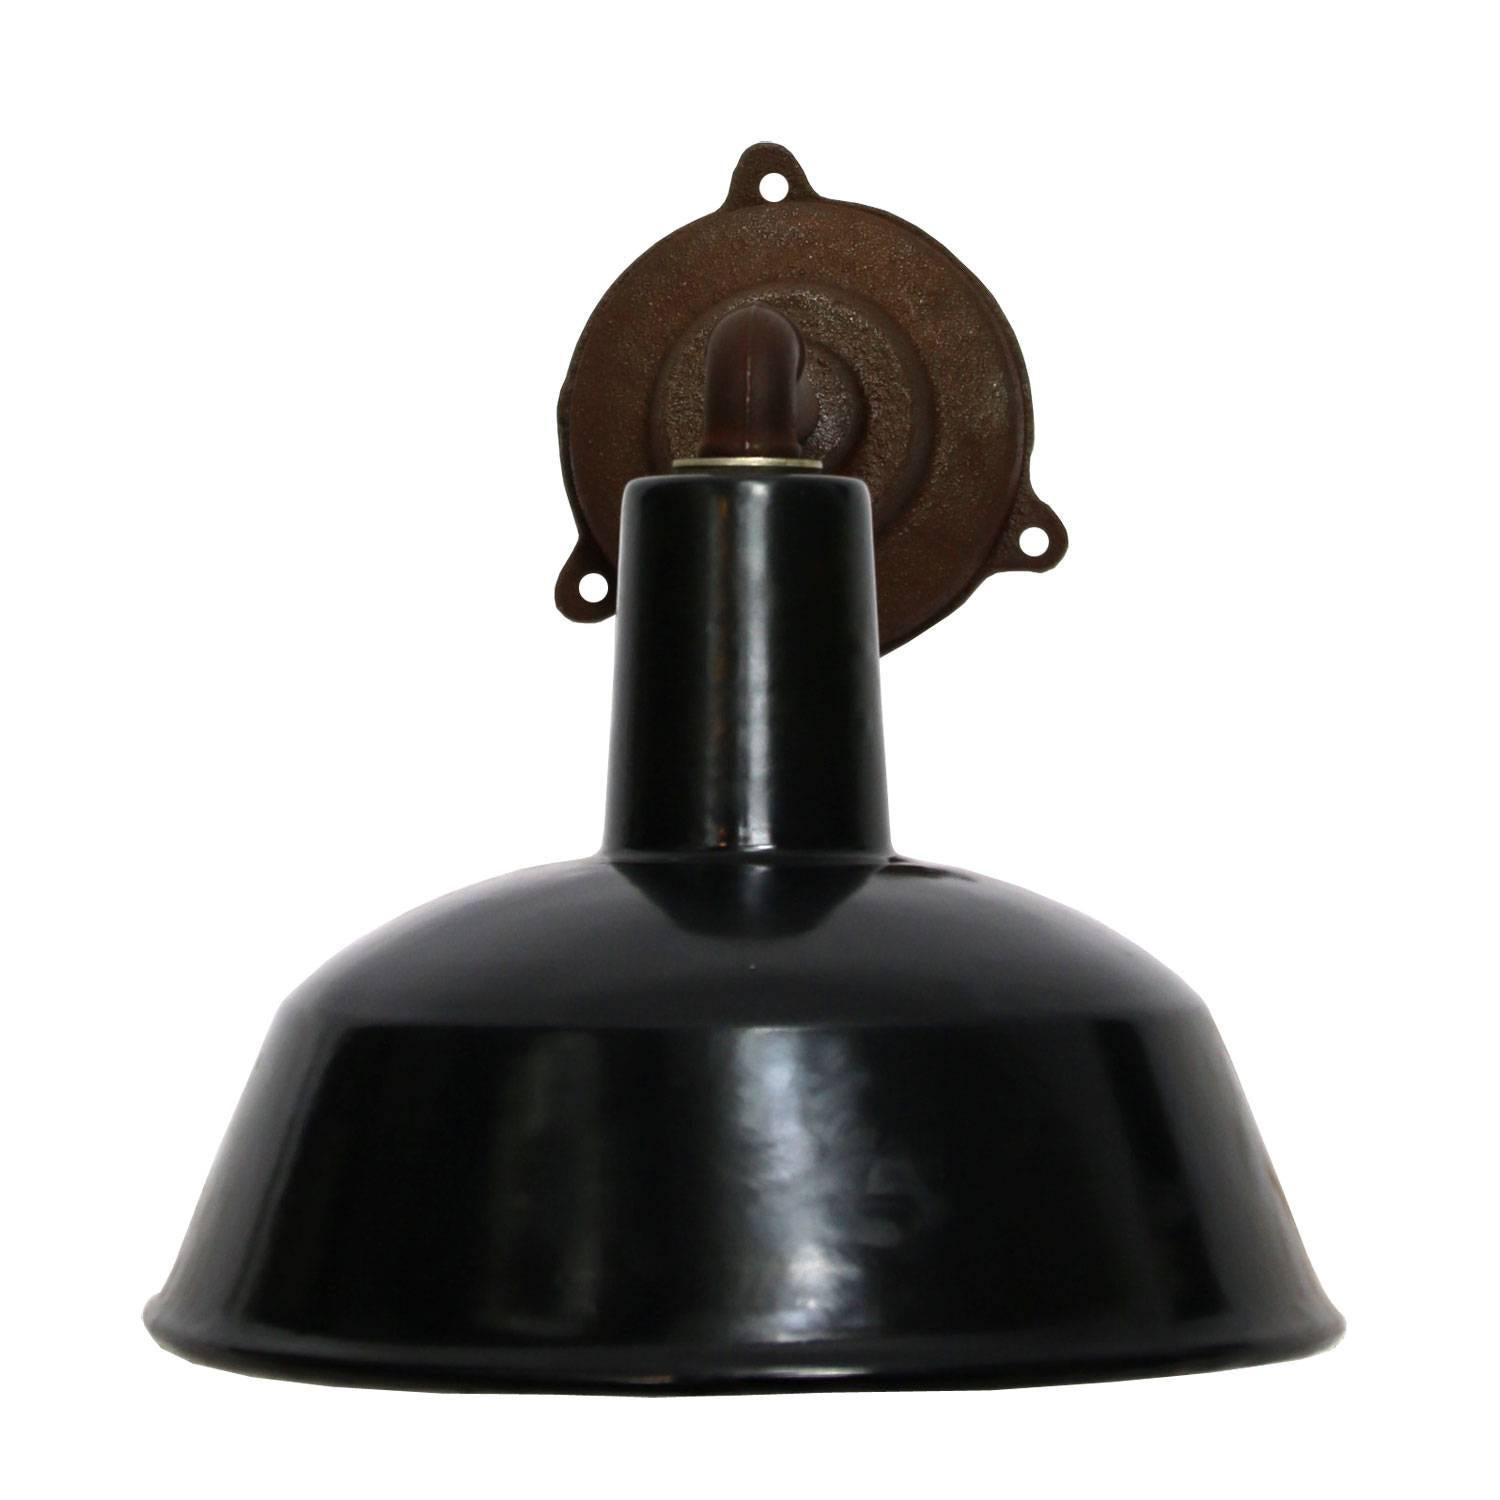 Factory wall light. Black enamel. White interior. Diameter cast iron wall piece: 12 cm, three holes to secure.

Weight: 2.5 kg / 5.5 lb

All lamps have been made suitable by international standards for incandescent light bulbs, energy-efficient and